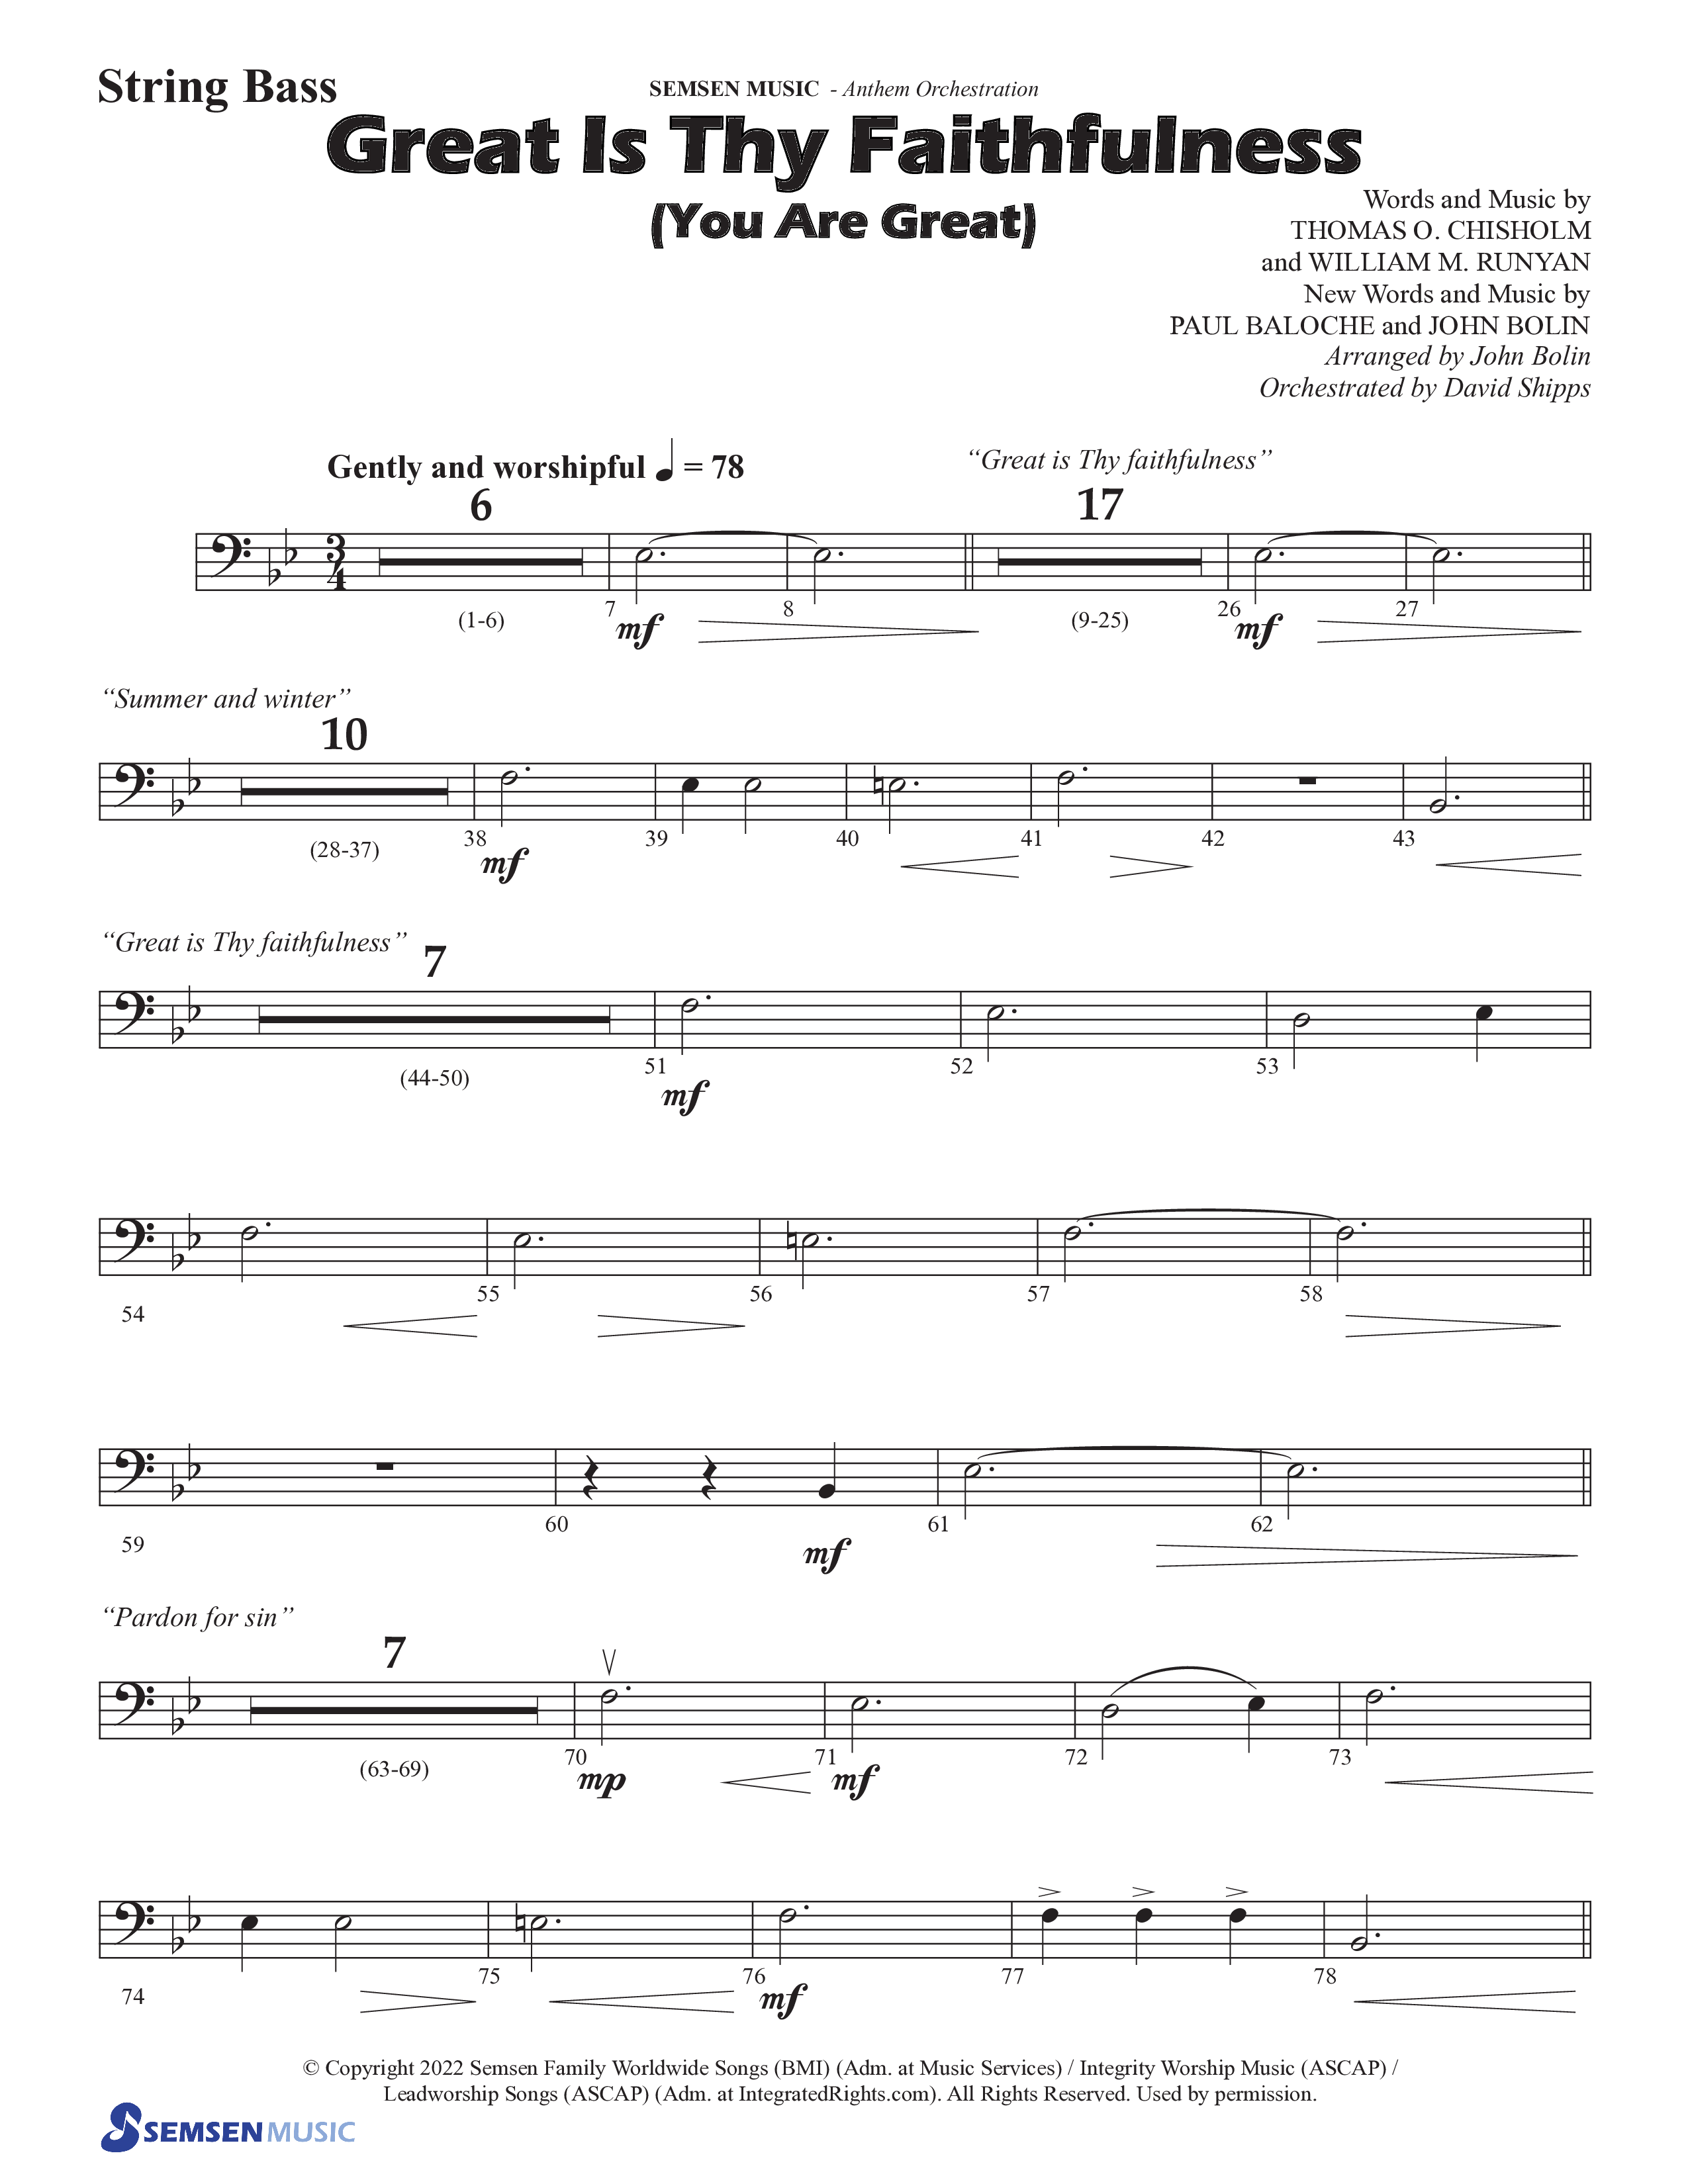 Great Is Thy Faithfulness (You Are Great) (Choral Anthem SATB) String Bass (Semsen Music / Arr. John Bolin / Orch. David Shipps)